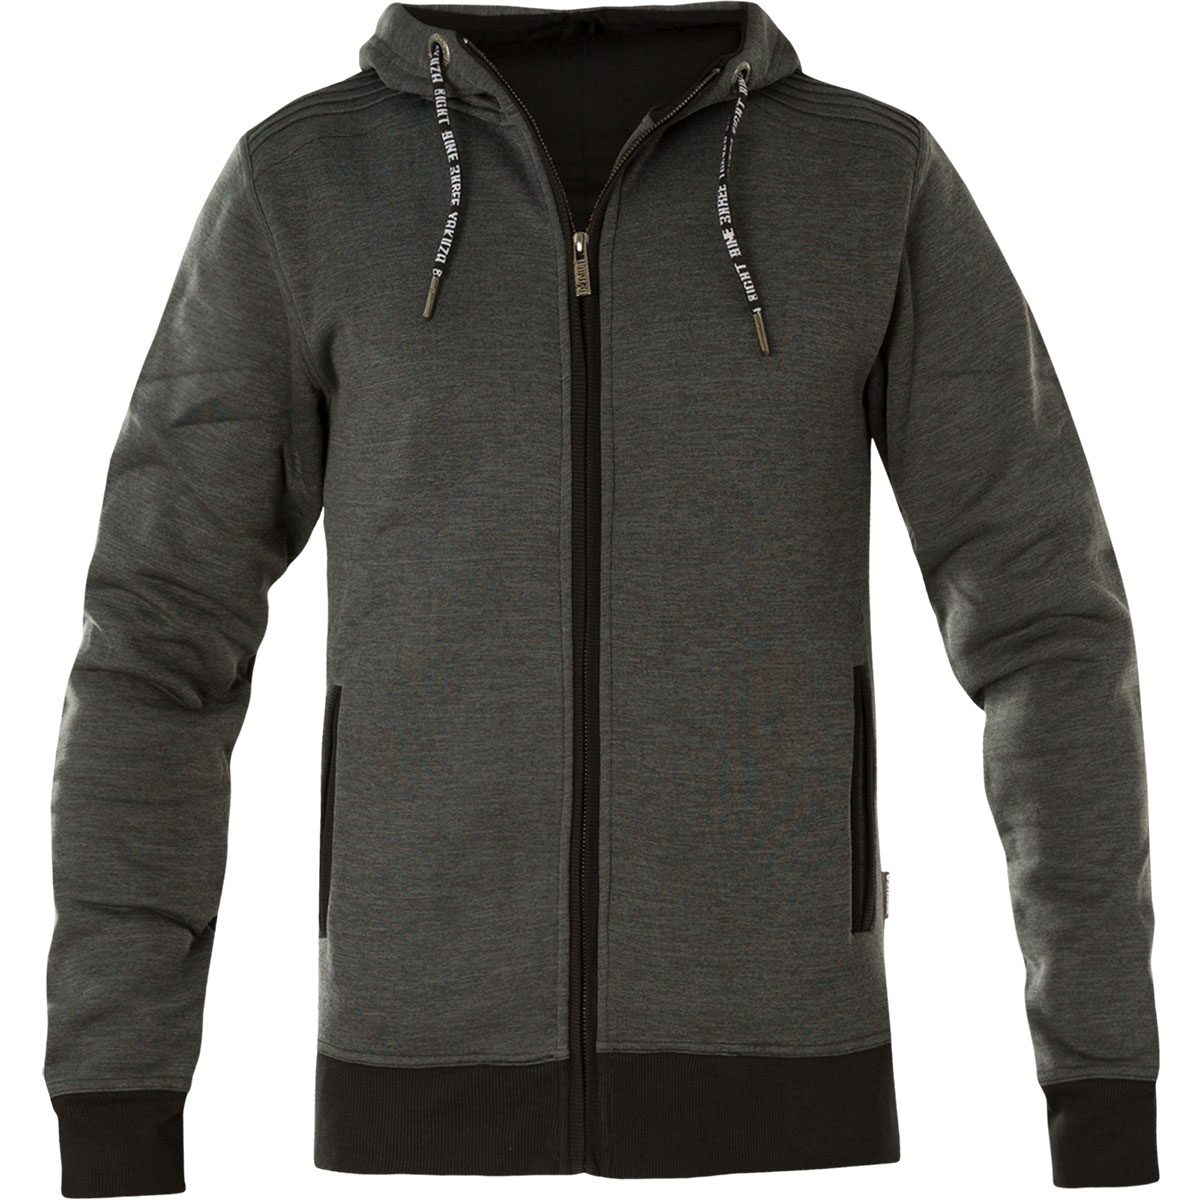 Yakuza S&F Sports Line Limitless hooded jacket HZB-14501 in grey with ...